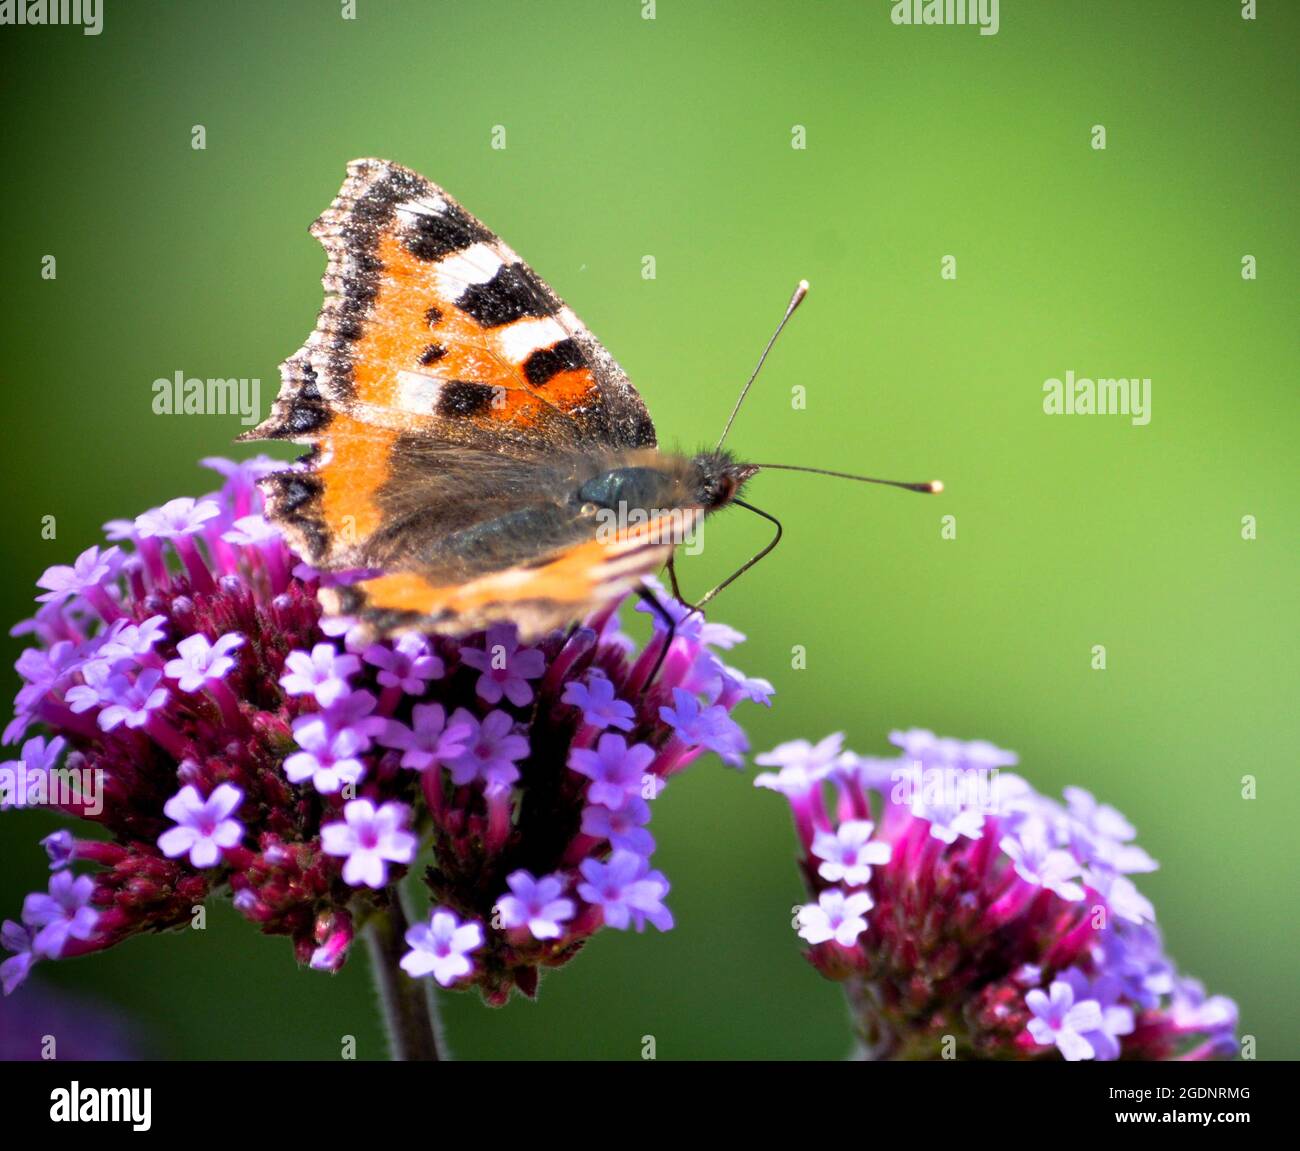 Small tortoise shell butterfly (Aglais urticae) on a verbena bonariensis flower set against a green background Stock Photo